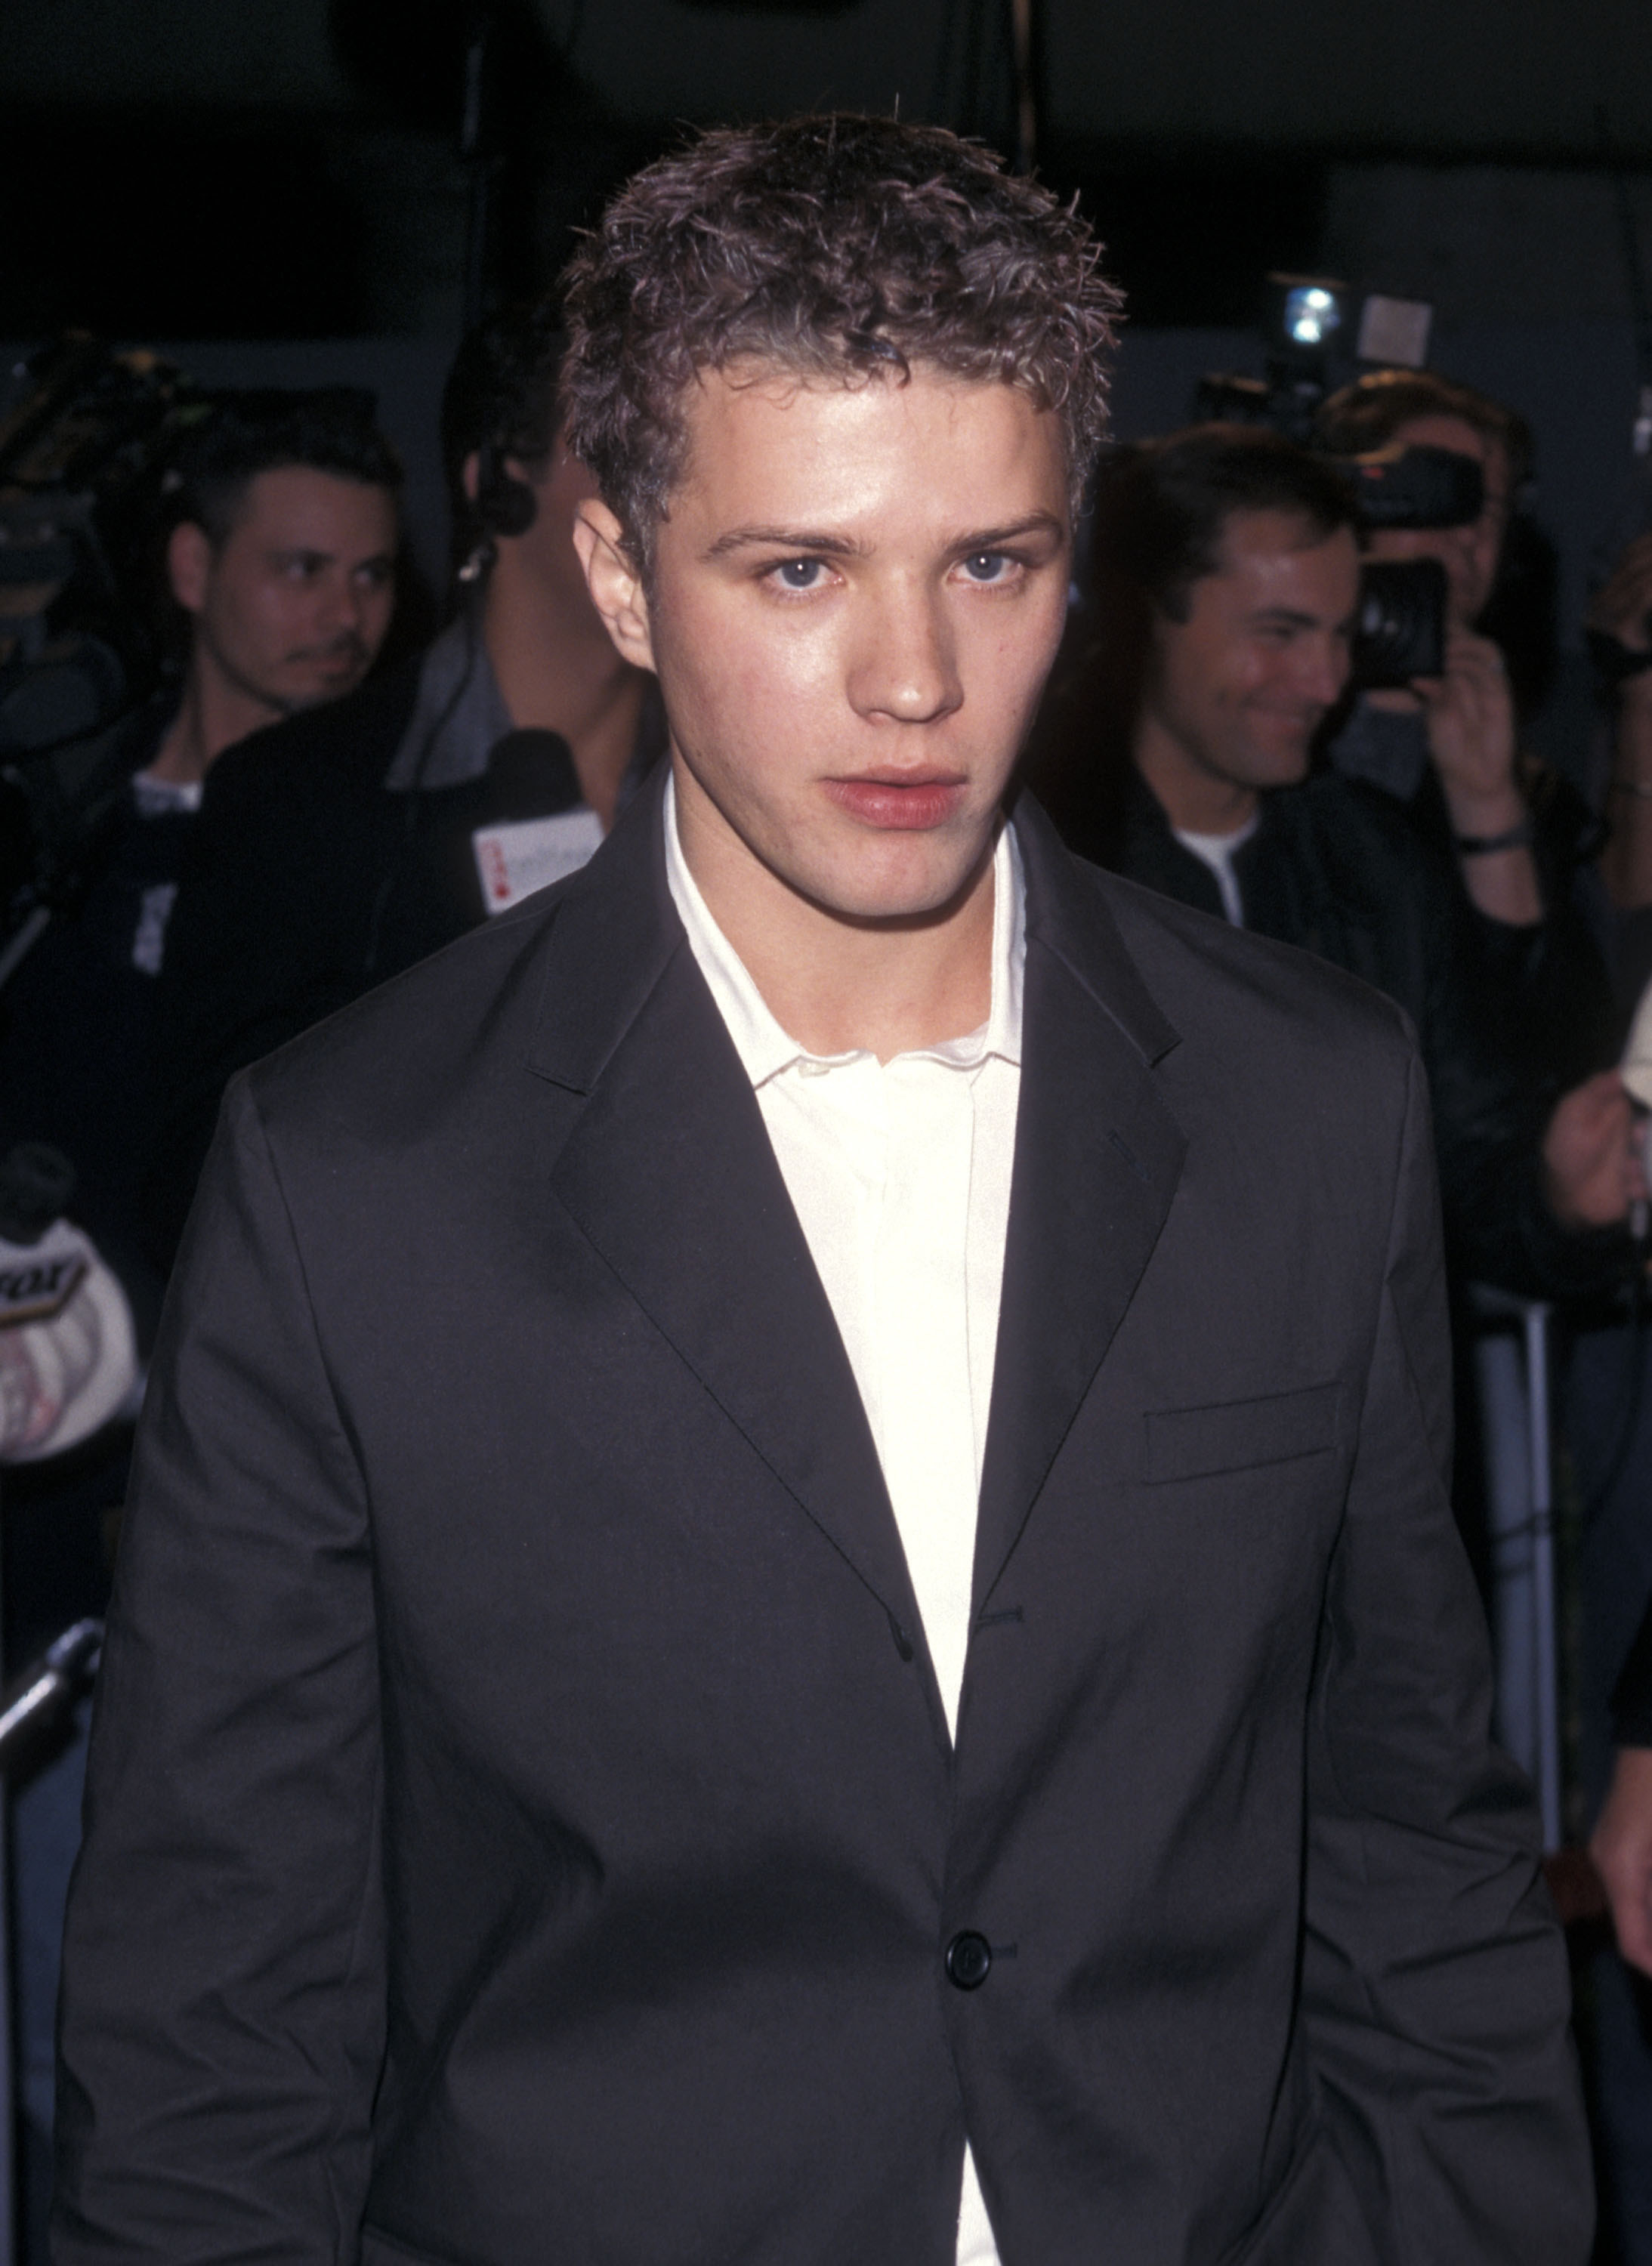 Ryan Phillippe posing at a film premiere